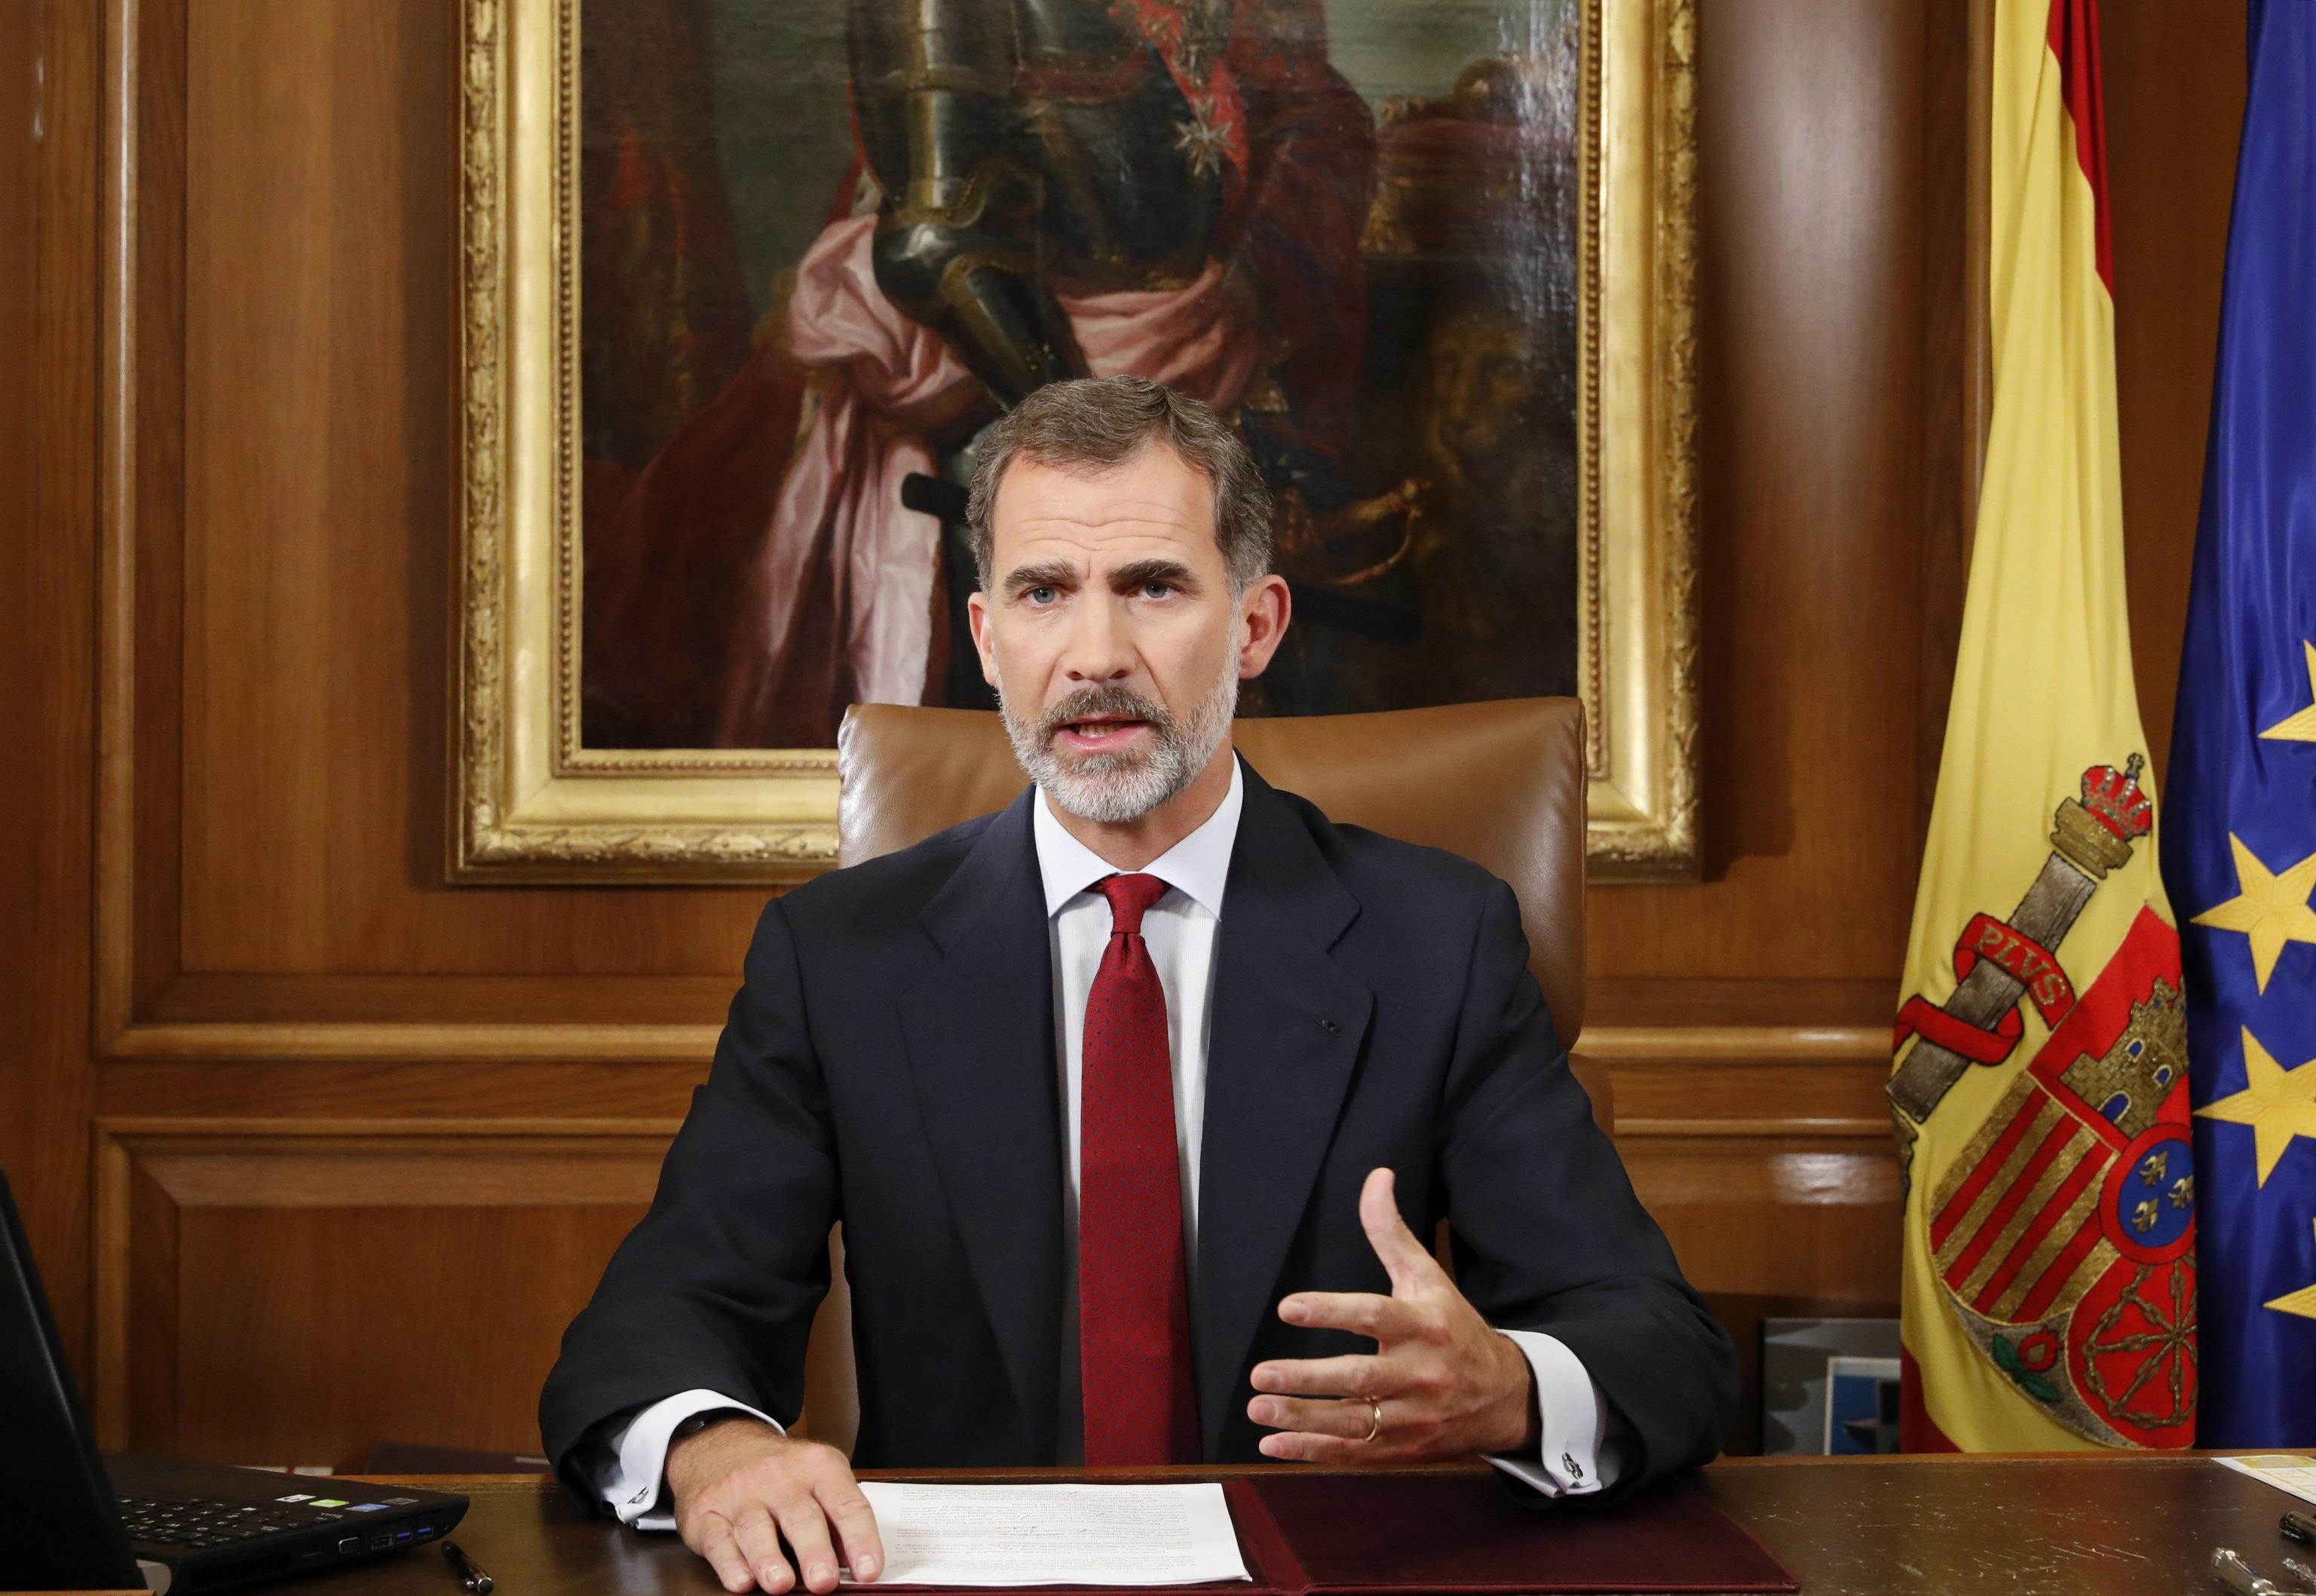 A handout photo made available by the Spanish Royal House shows Spanish King Felipe VI giving a speech two days after the celebration of the Catalonian illegal referendum, in Madrid, Spain, 03 October 2017.  ANSA/Francisco Gomez / Spanish Royal House HANDOUT  HANDOUT EDITORIAL USE ONLY/NO SALES